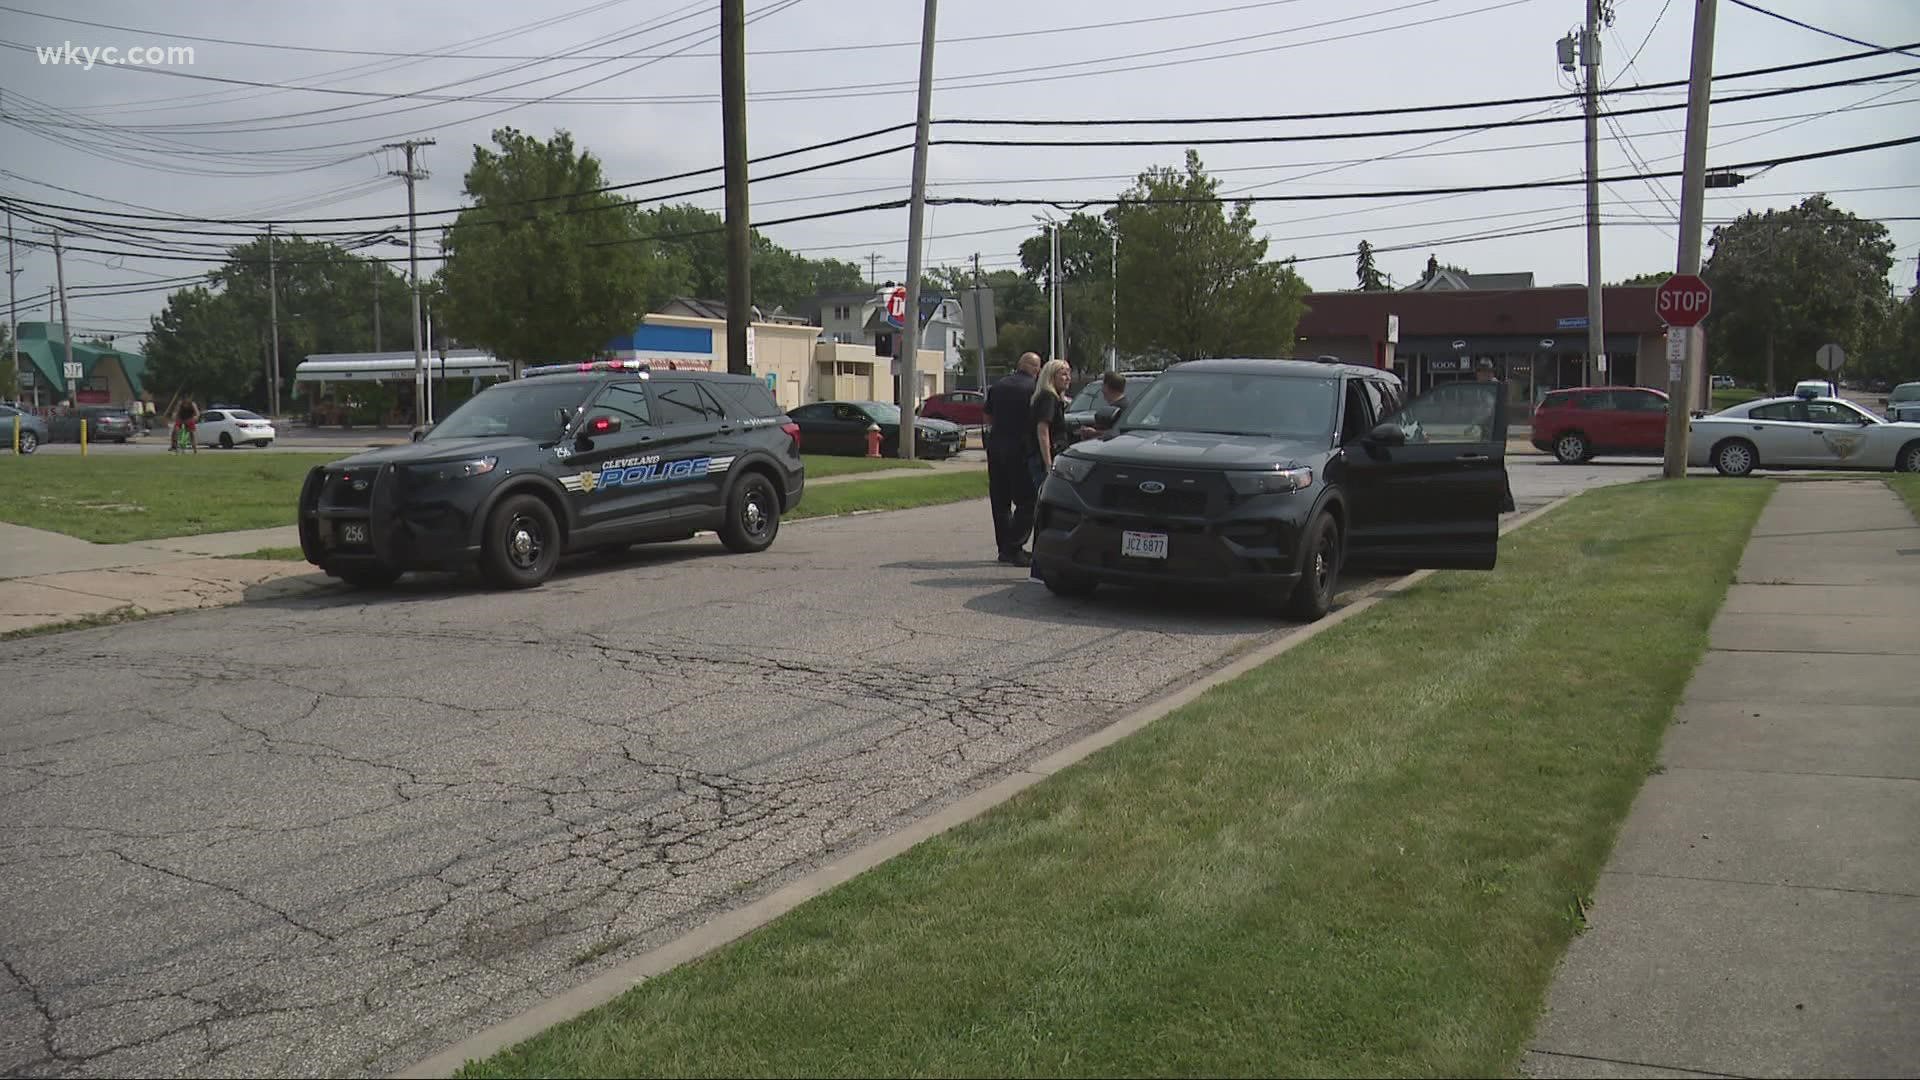 The Cleveland Police Department is investigating a hit-and run that injured two officers on Tuesday.